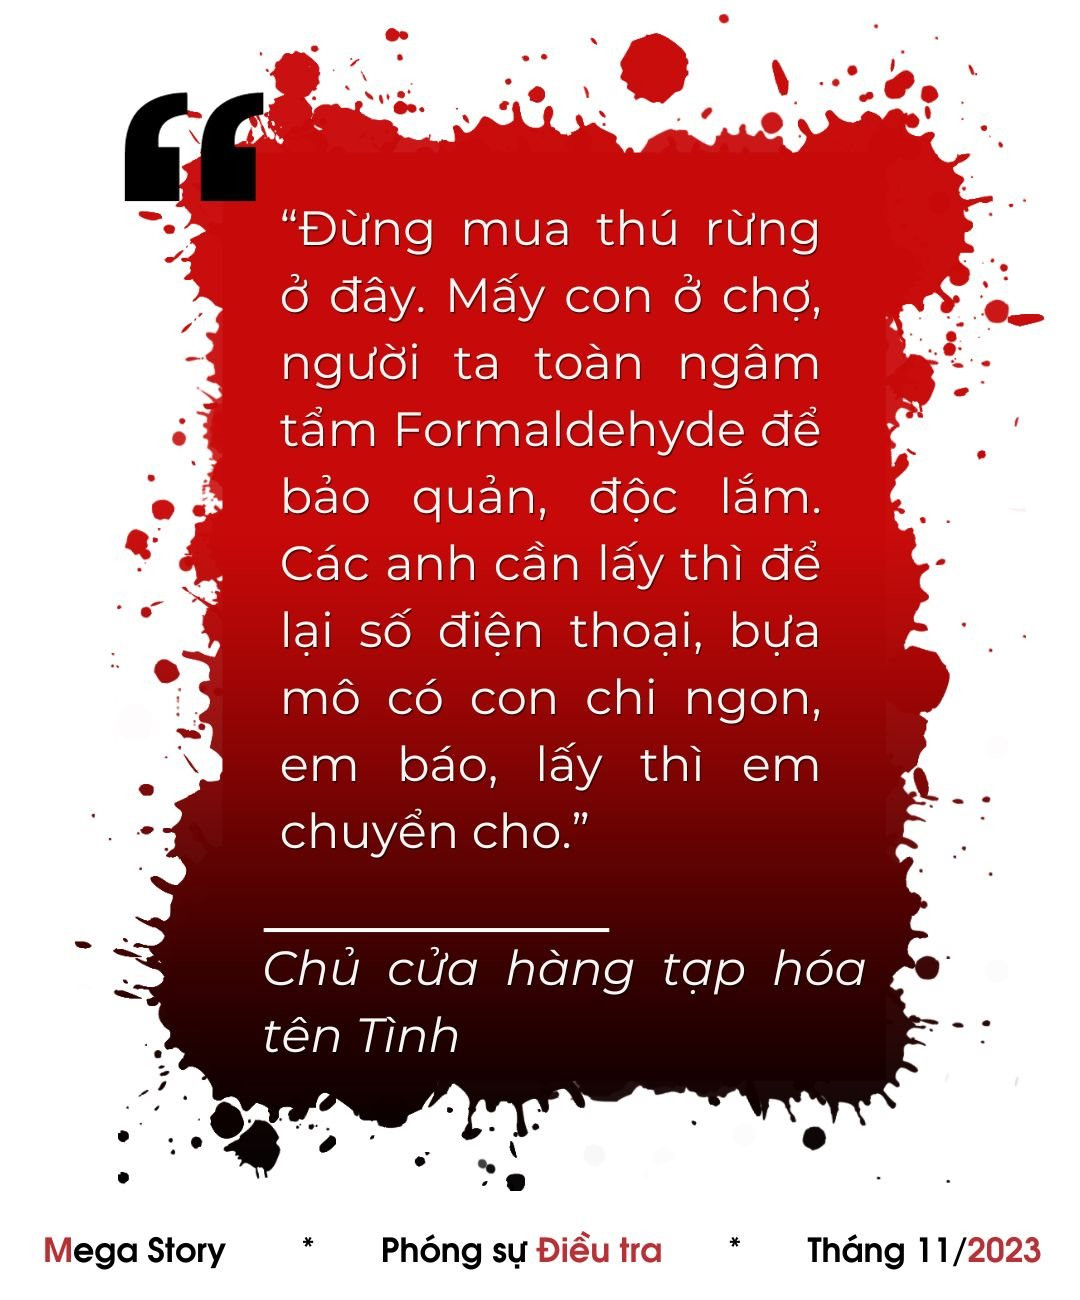 quote-tinh.jpg